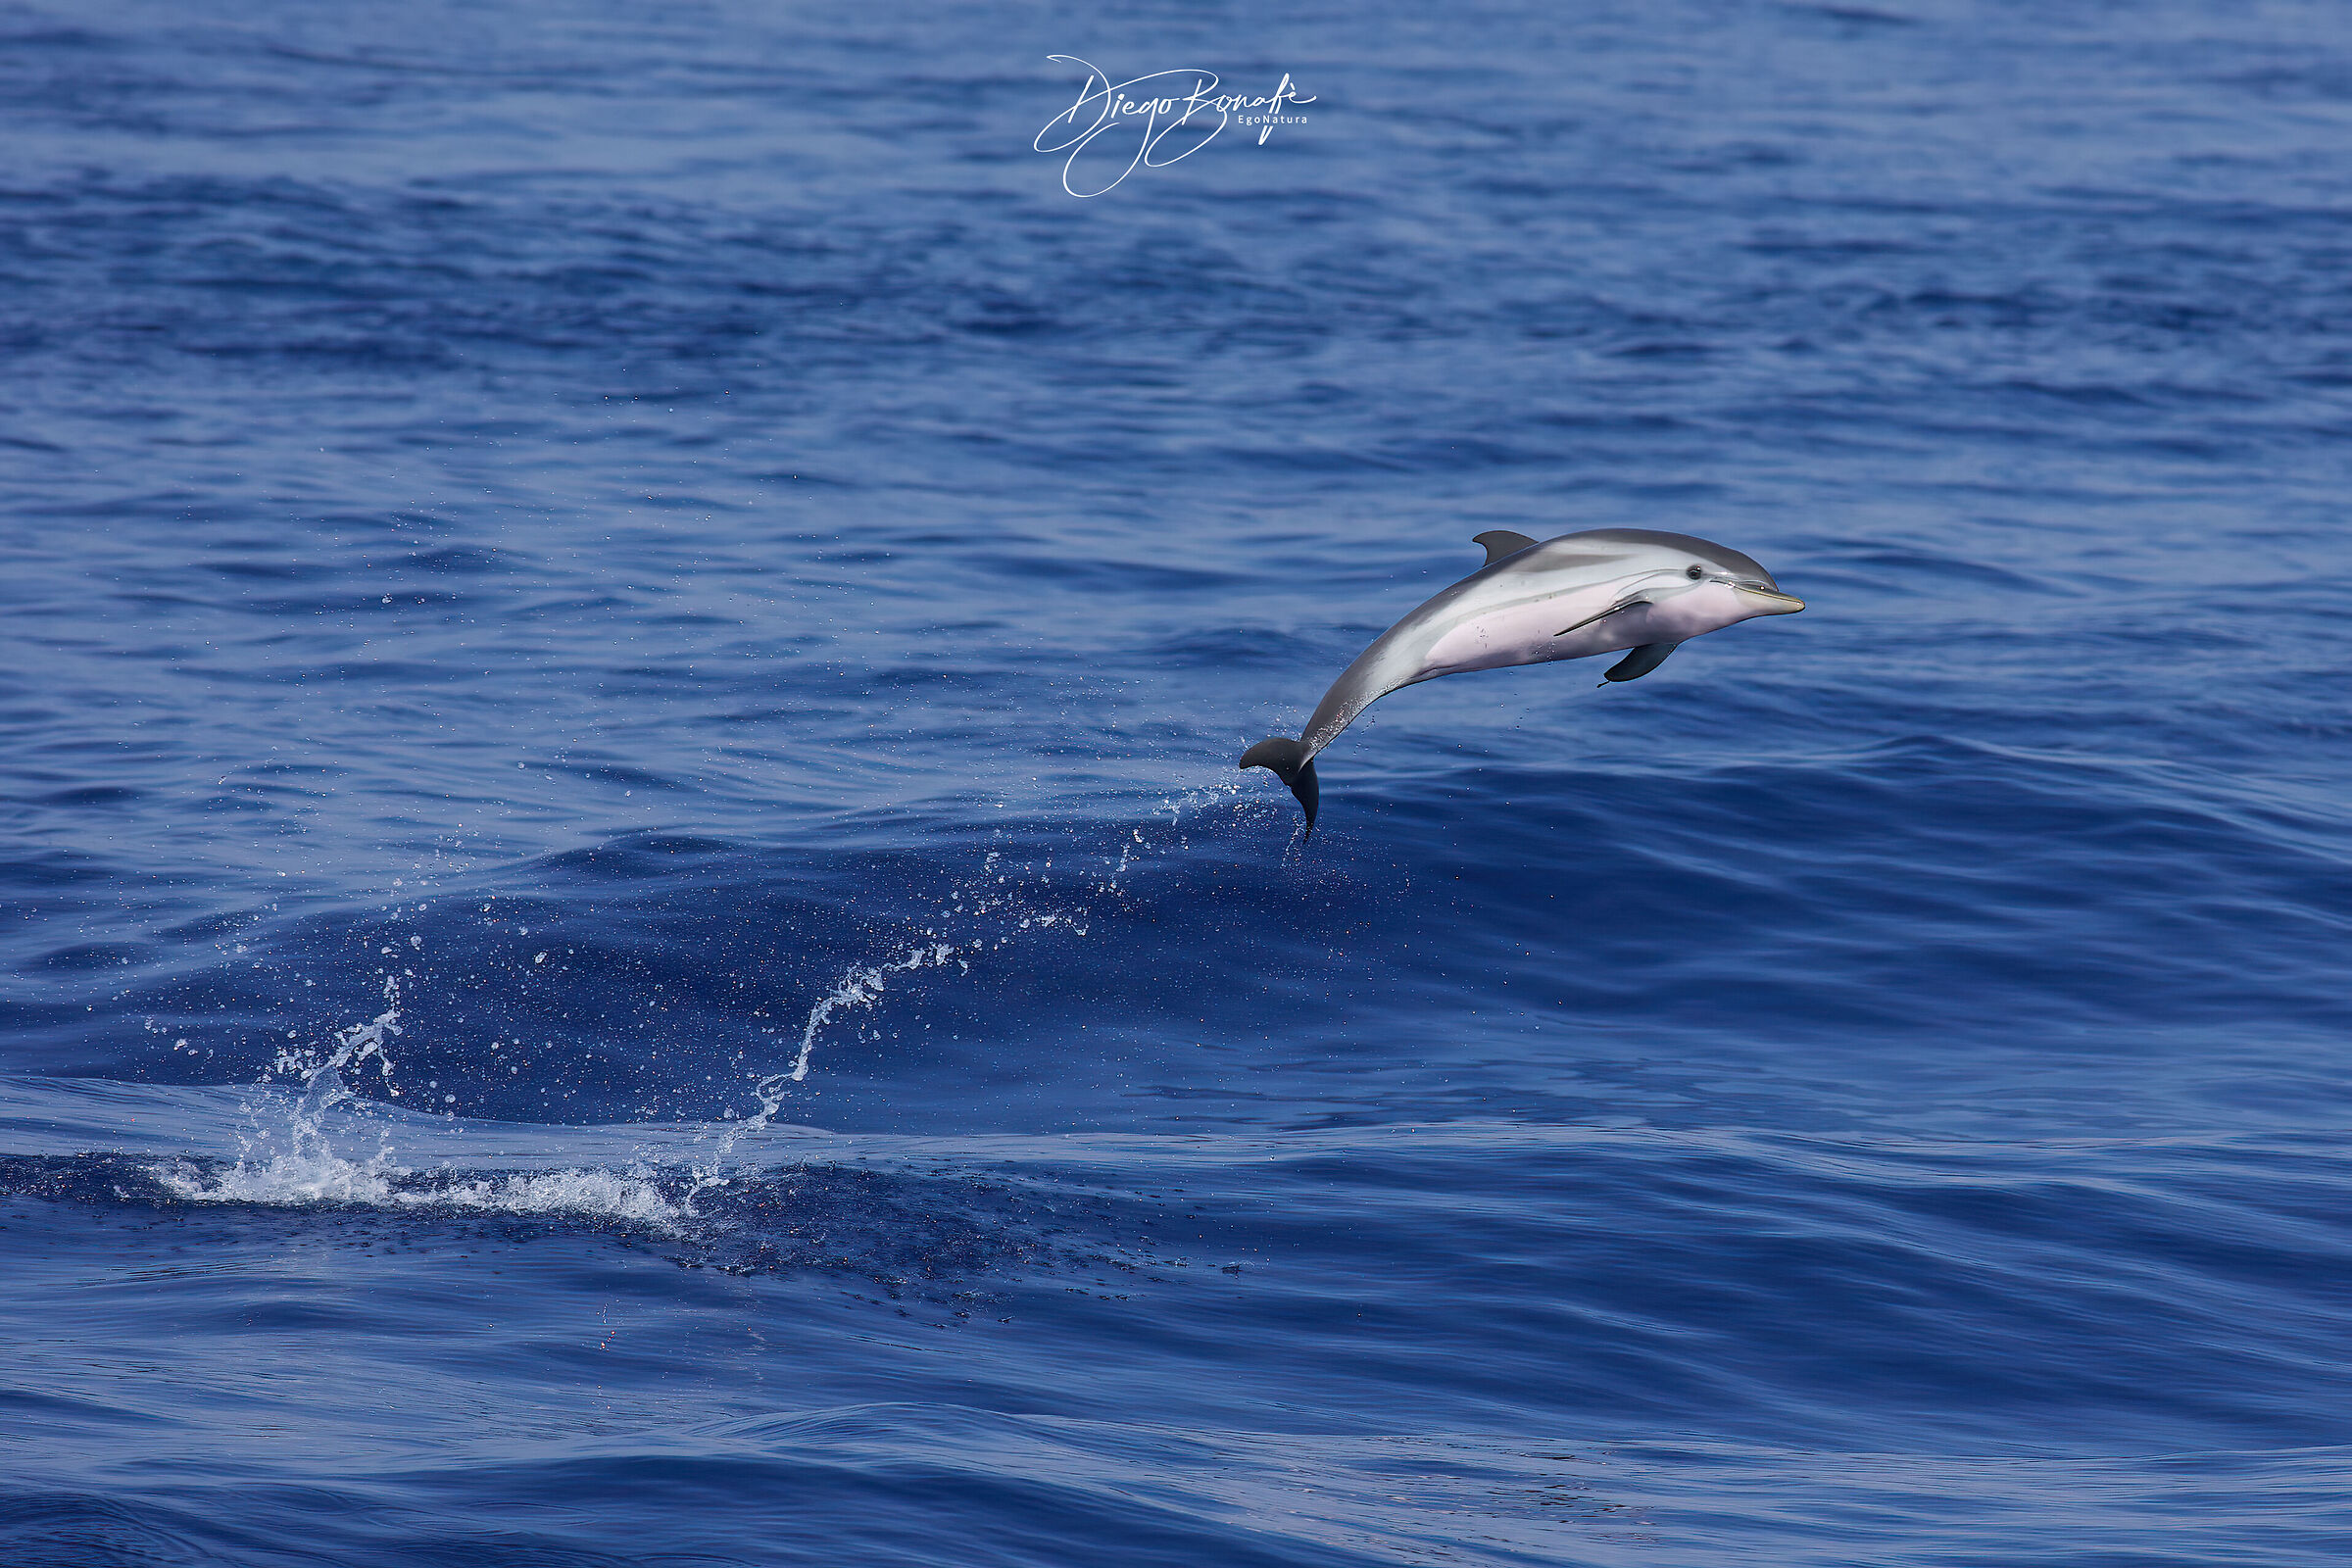 Striped dolphin ...